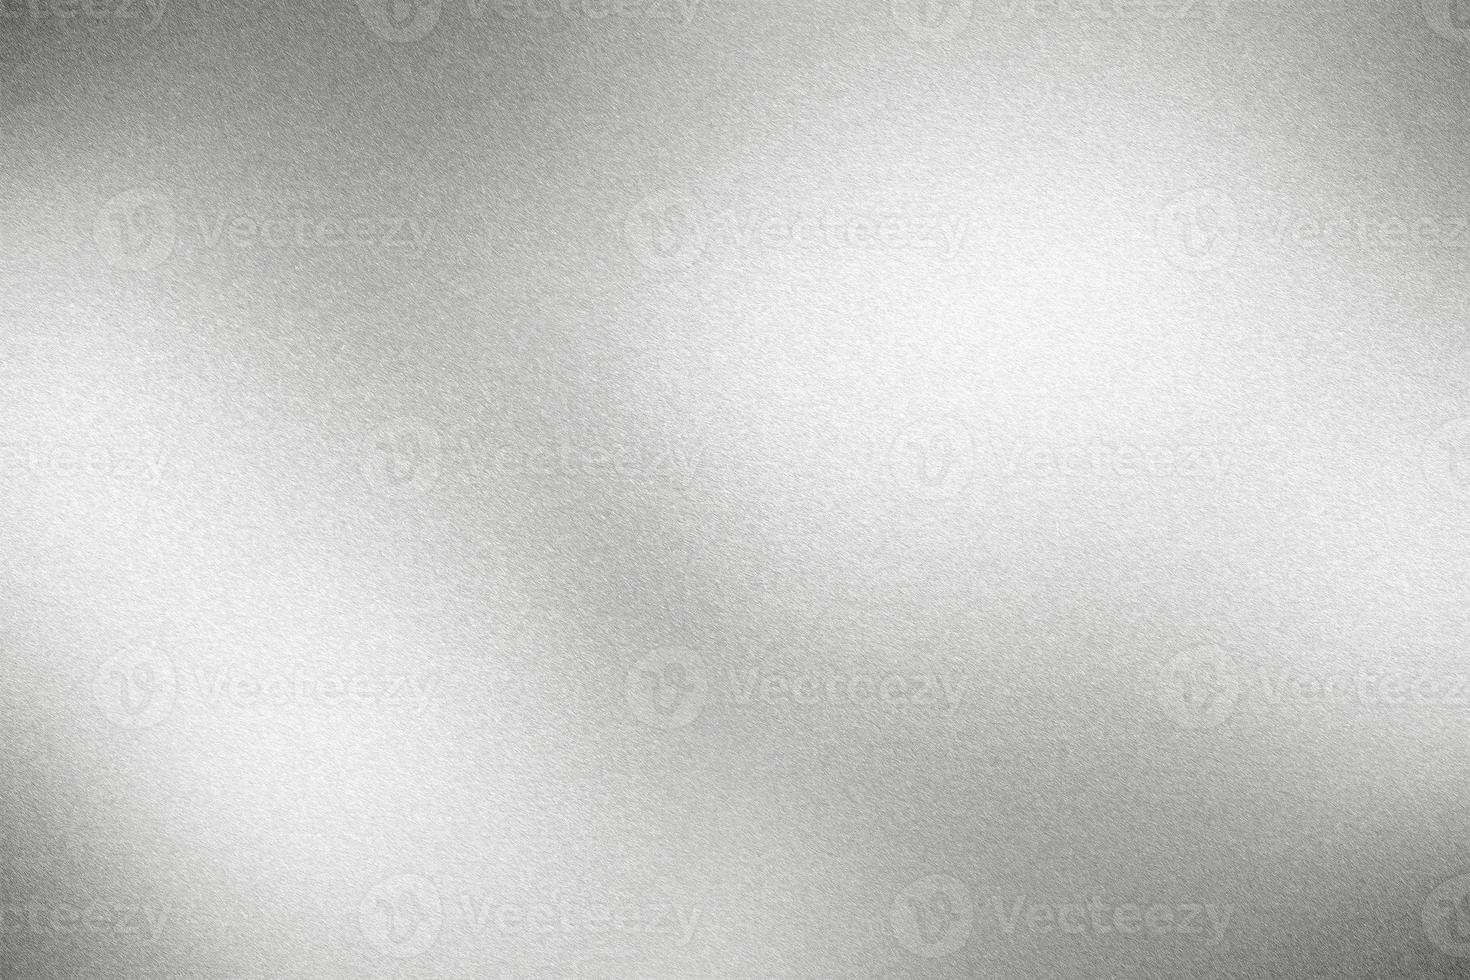 Glowing rough silver metallic plate, abstract texture background photo